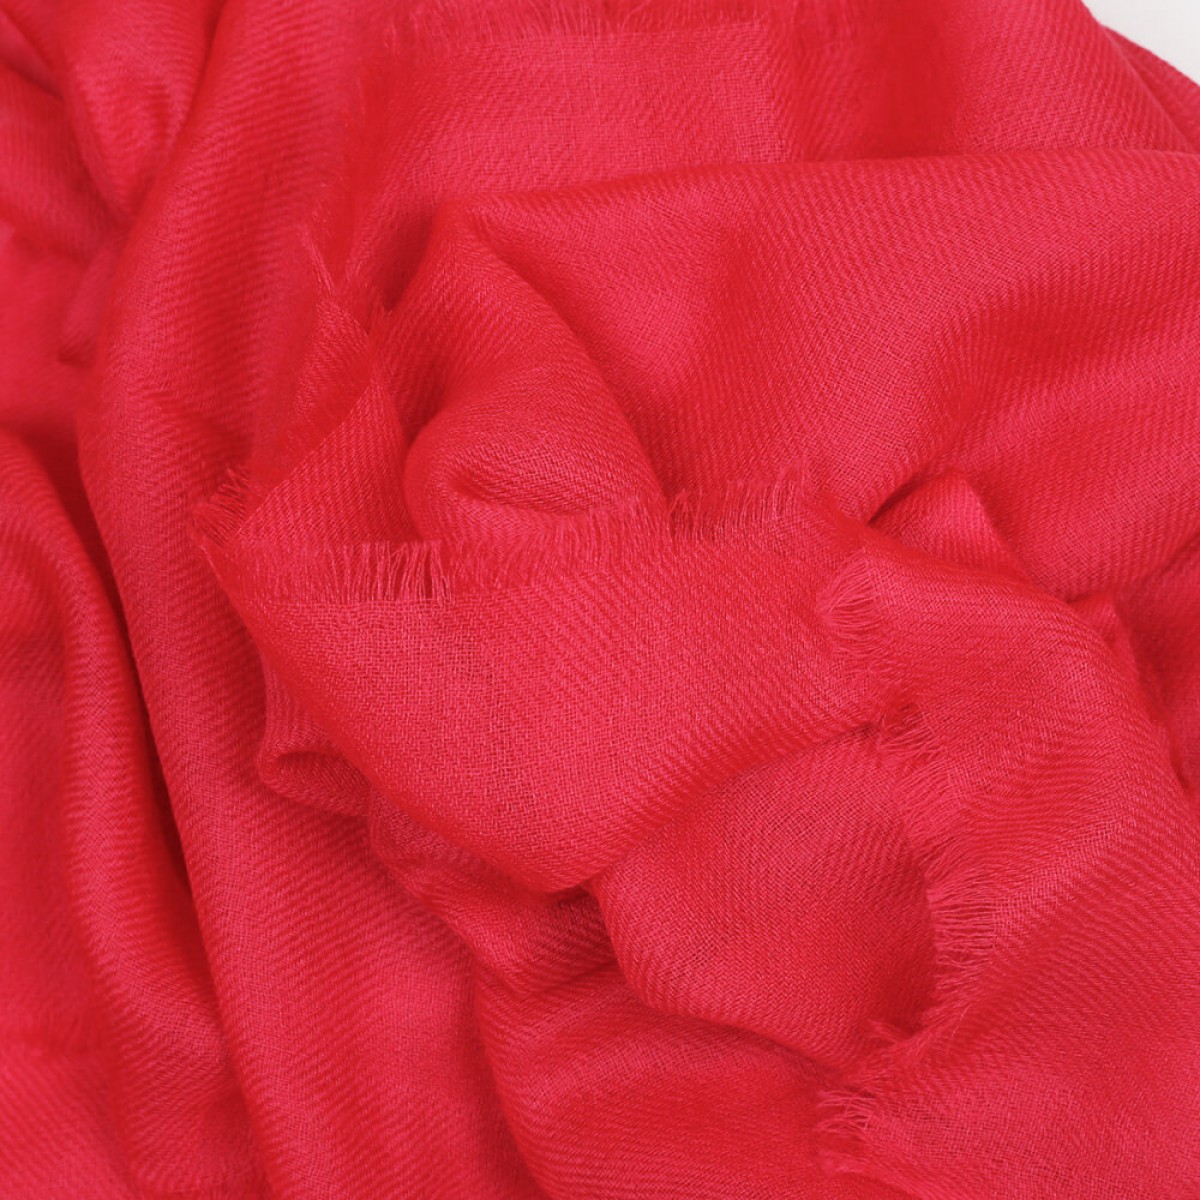 Sheer Pashmina Stole - Raspberry Red